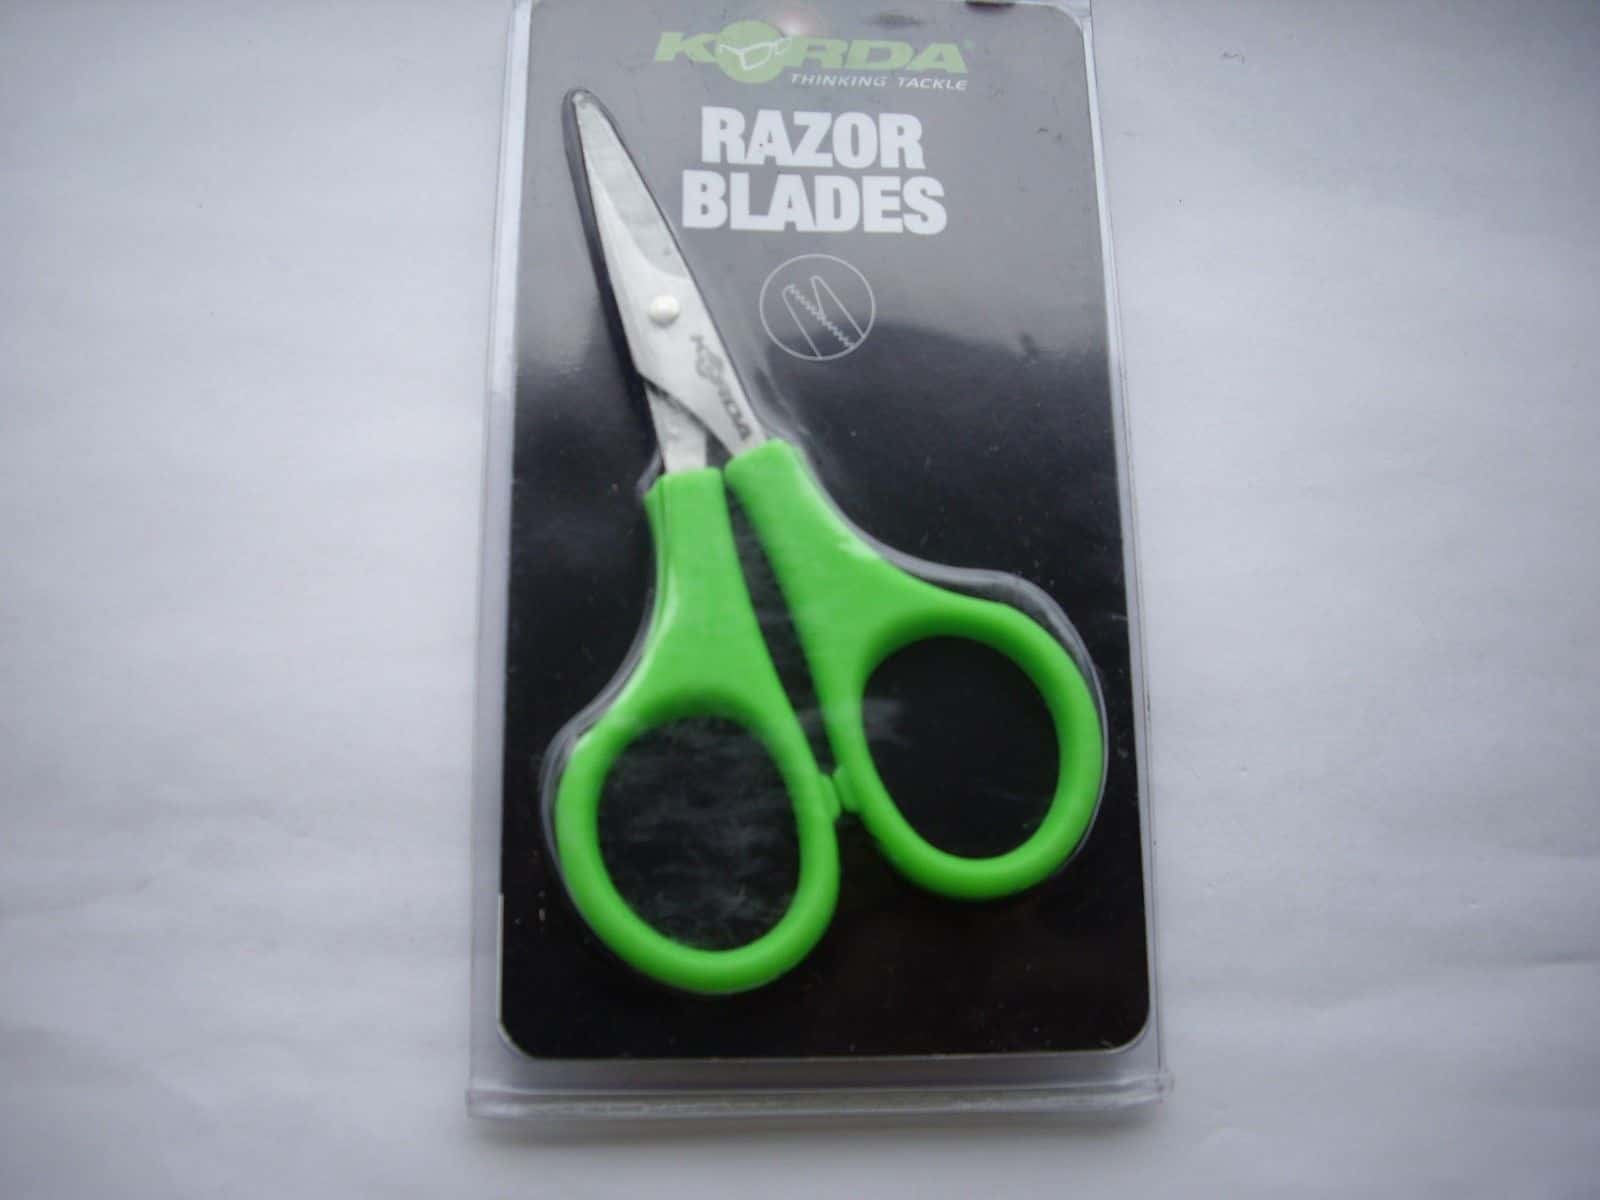 The Best Scissors To Use… Period